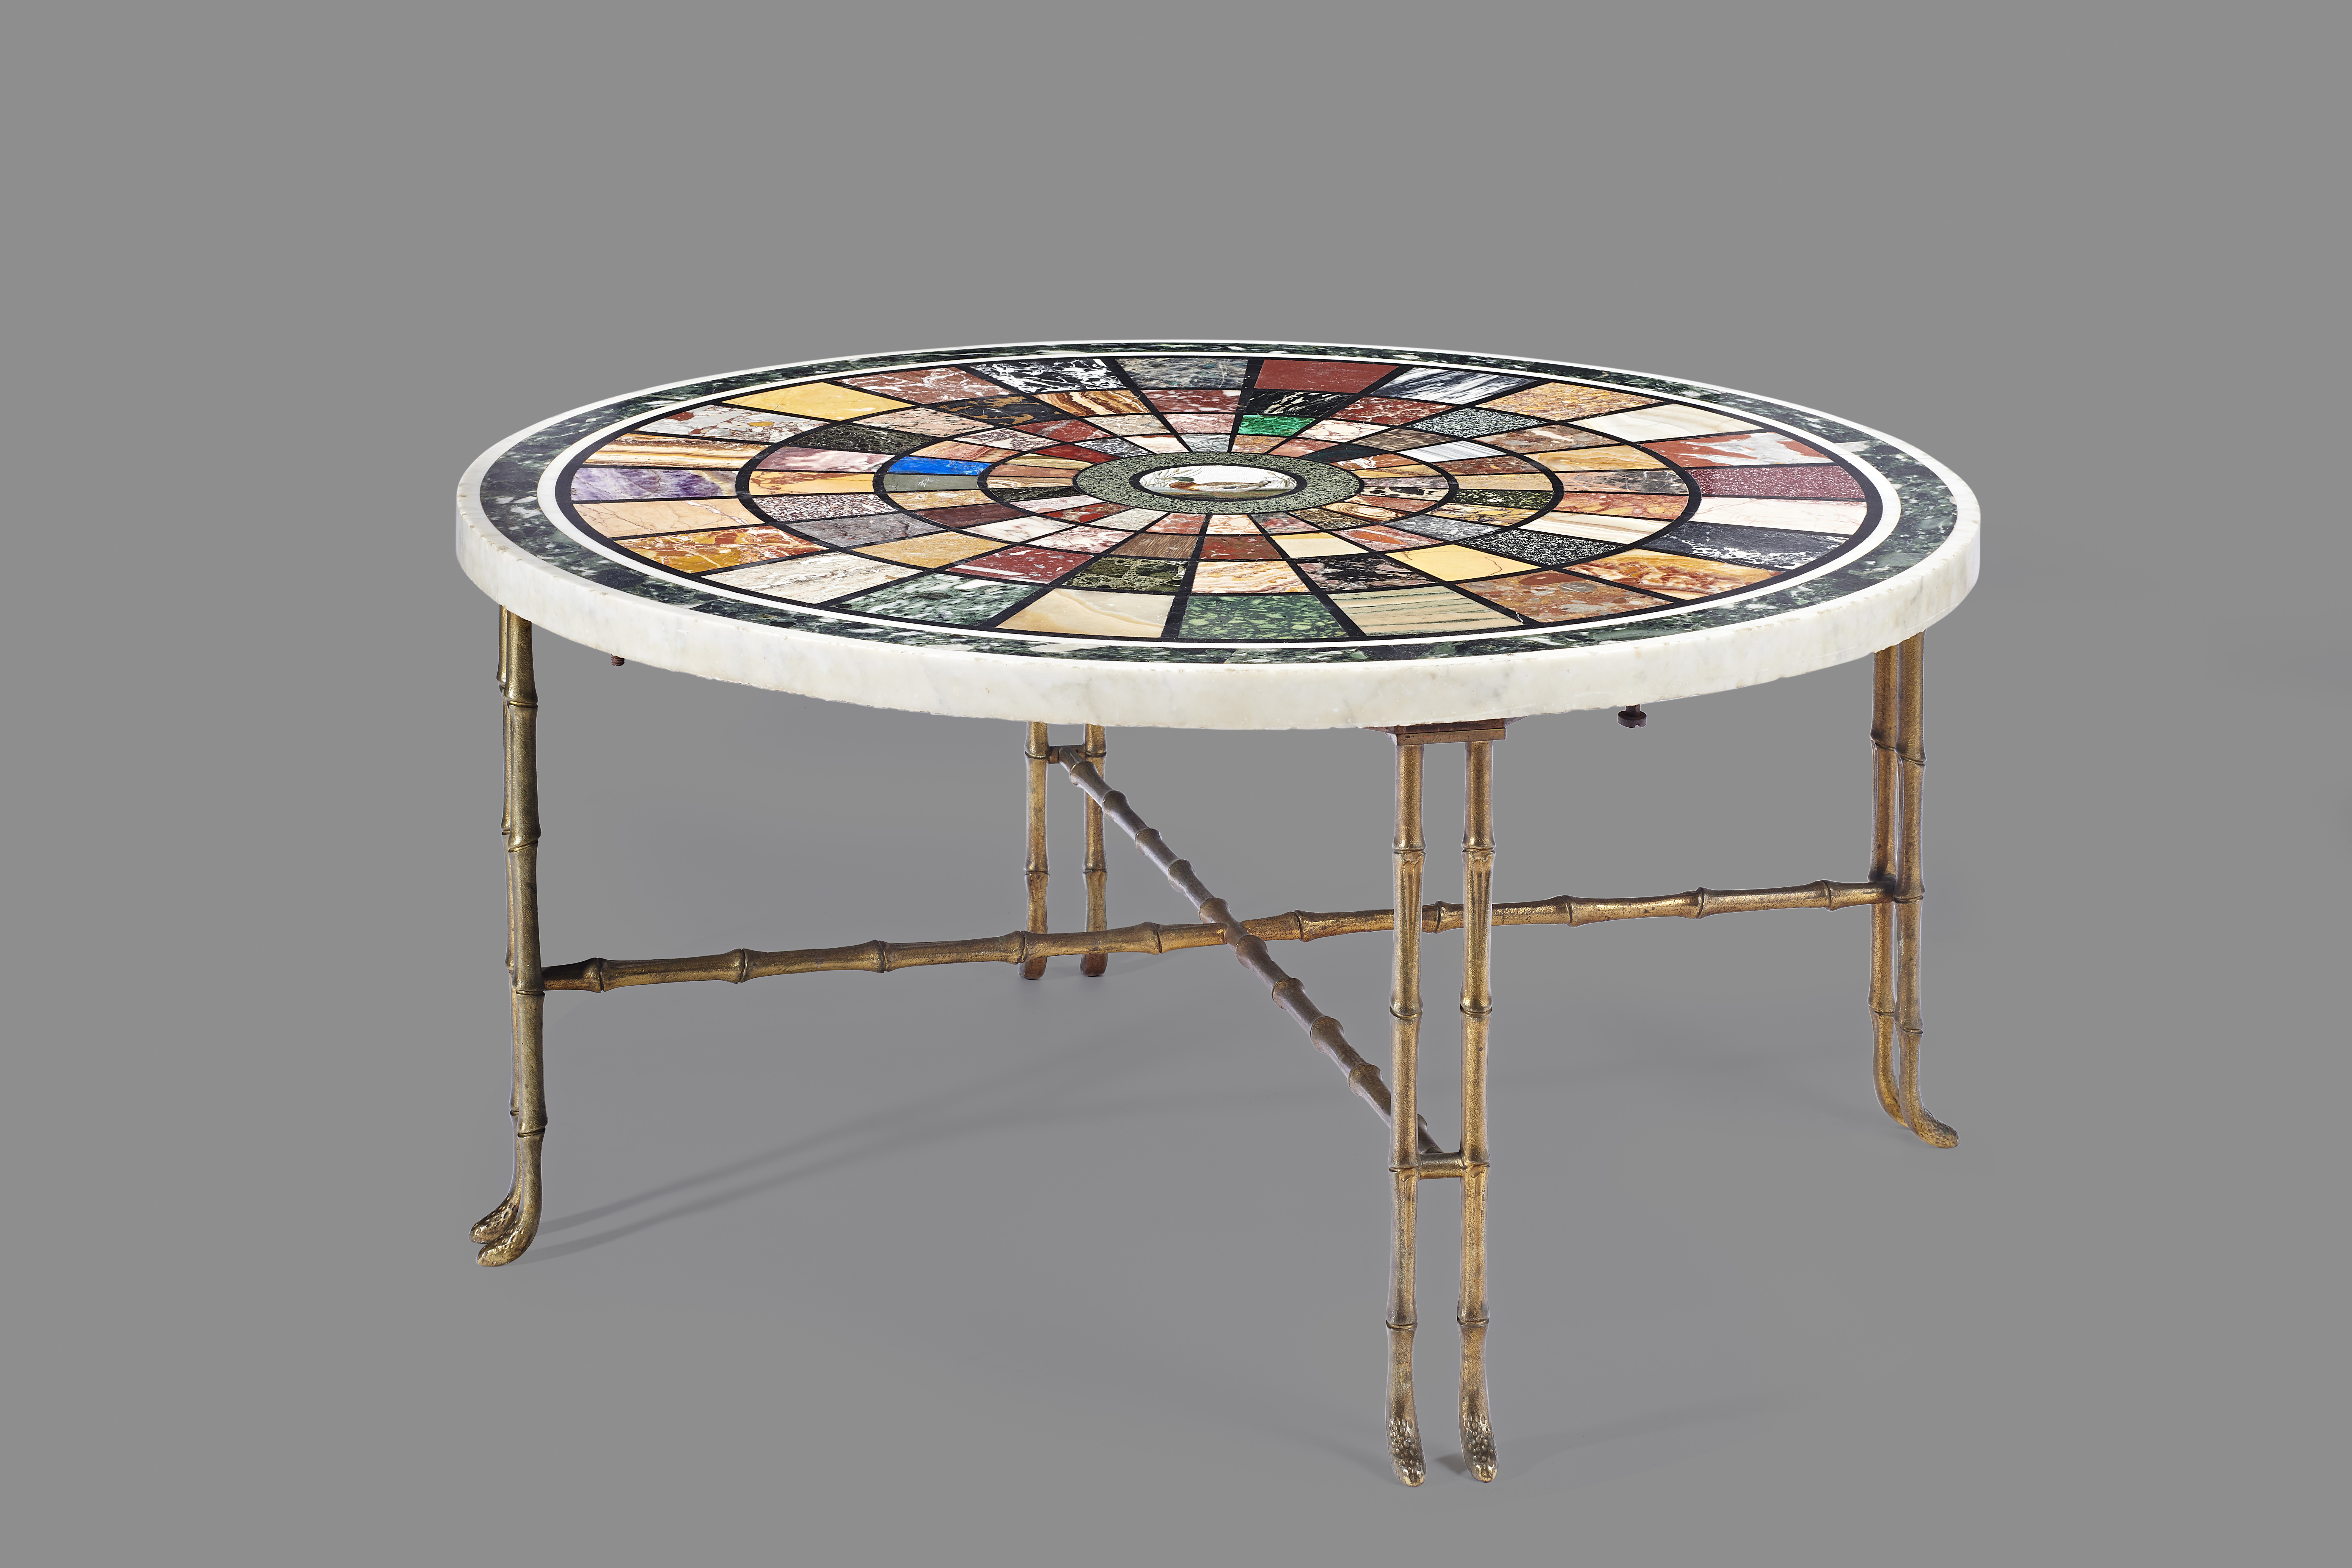 A mid-19th century Italian specimen marble and micromosaic Grand Tour table top, inlaid with - Image 2 of 3